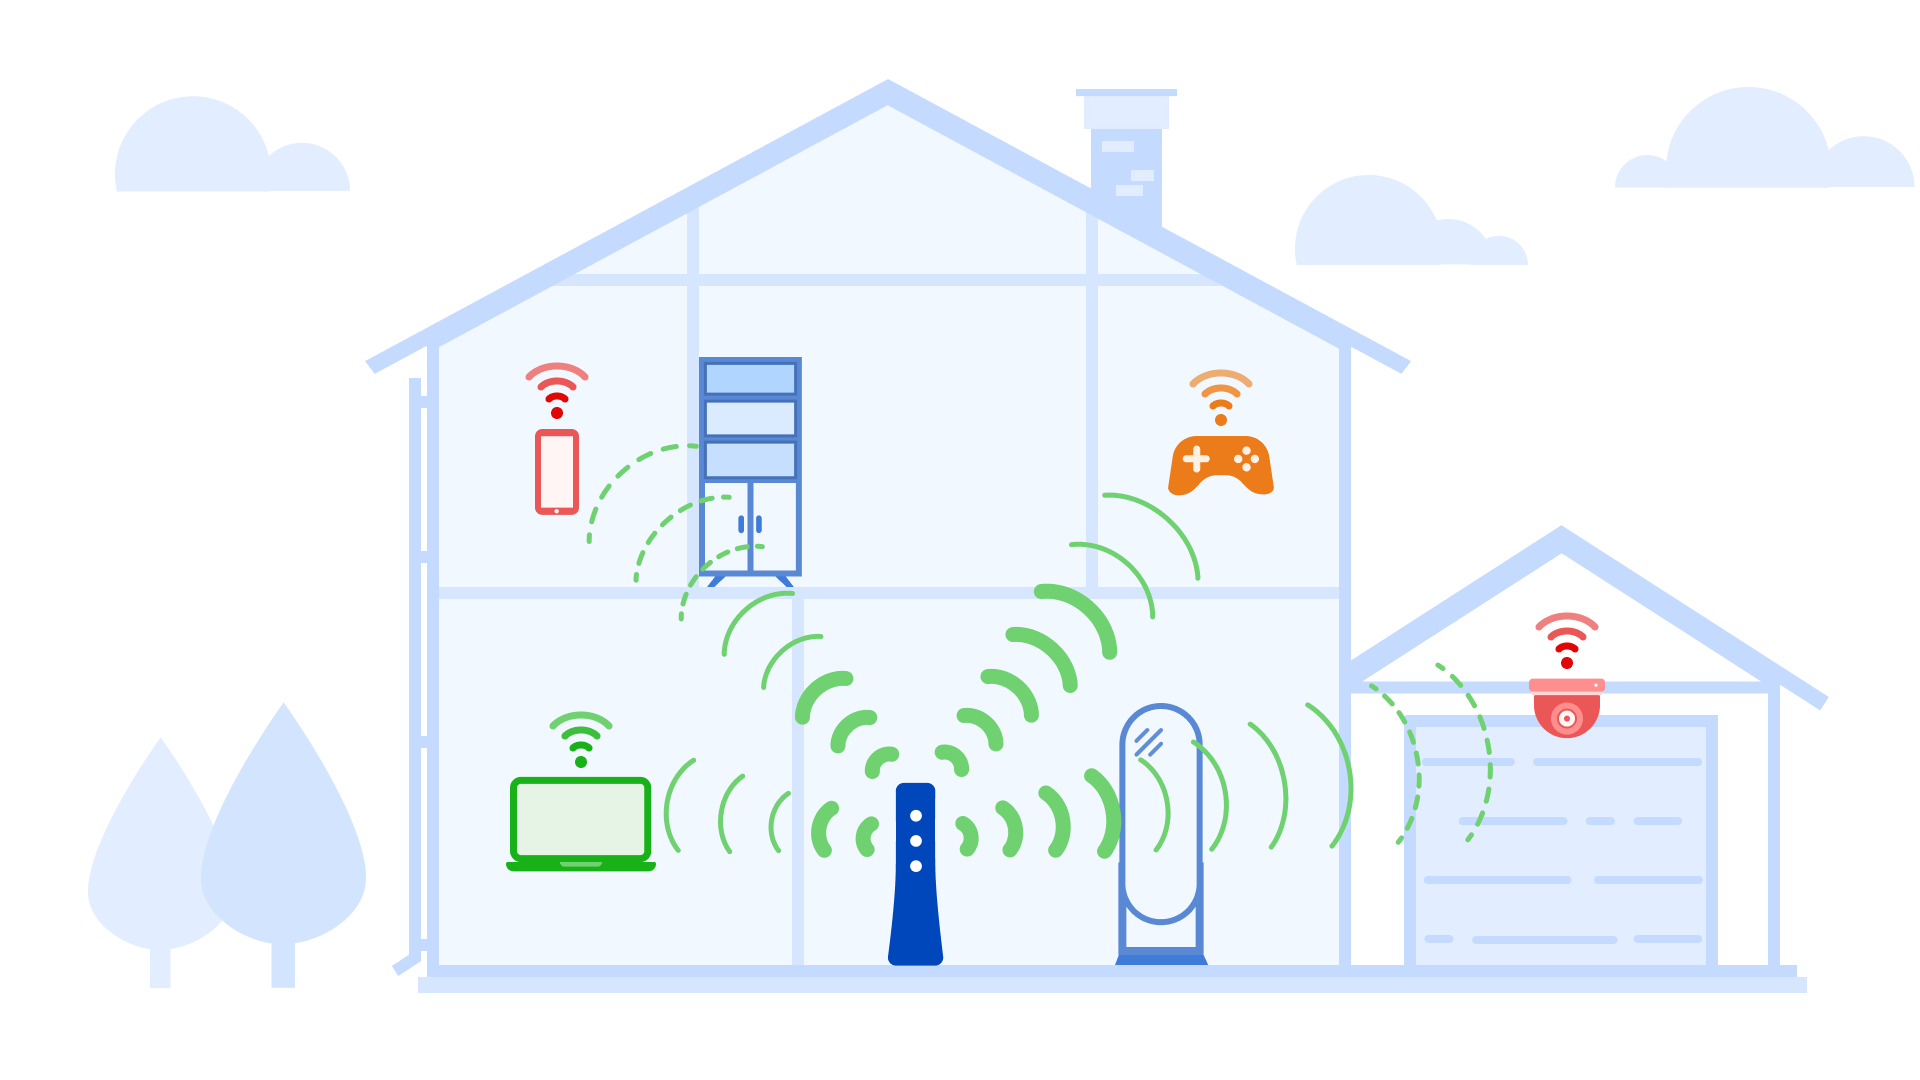 Illustration showing how distance and blocking can weaken WiFi signal